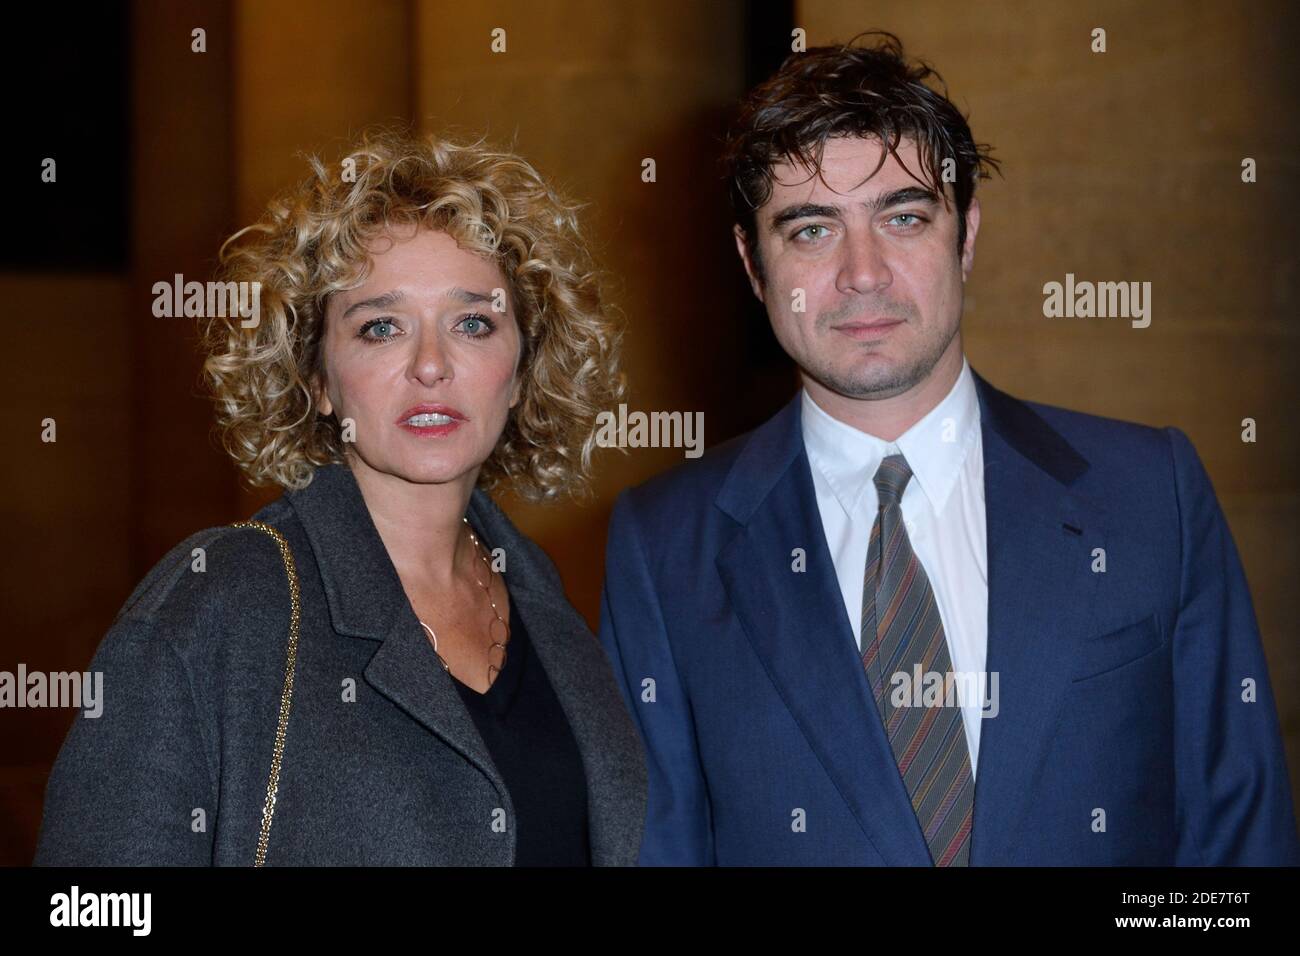 Valeria Golino and Riccardo Scamarcio attending the screening of the movie Euforia at the Italian Cultural Intitute followed by a dinner at the Italian Embassy in Paris, France on January 10, 2019. Photo by Aurore Marechal/ABACAPRESS.COM Stock Photo